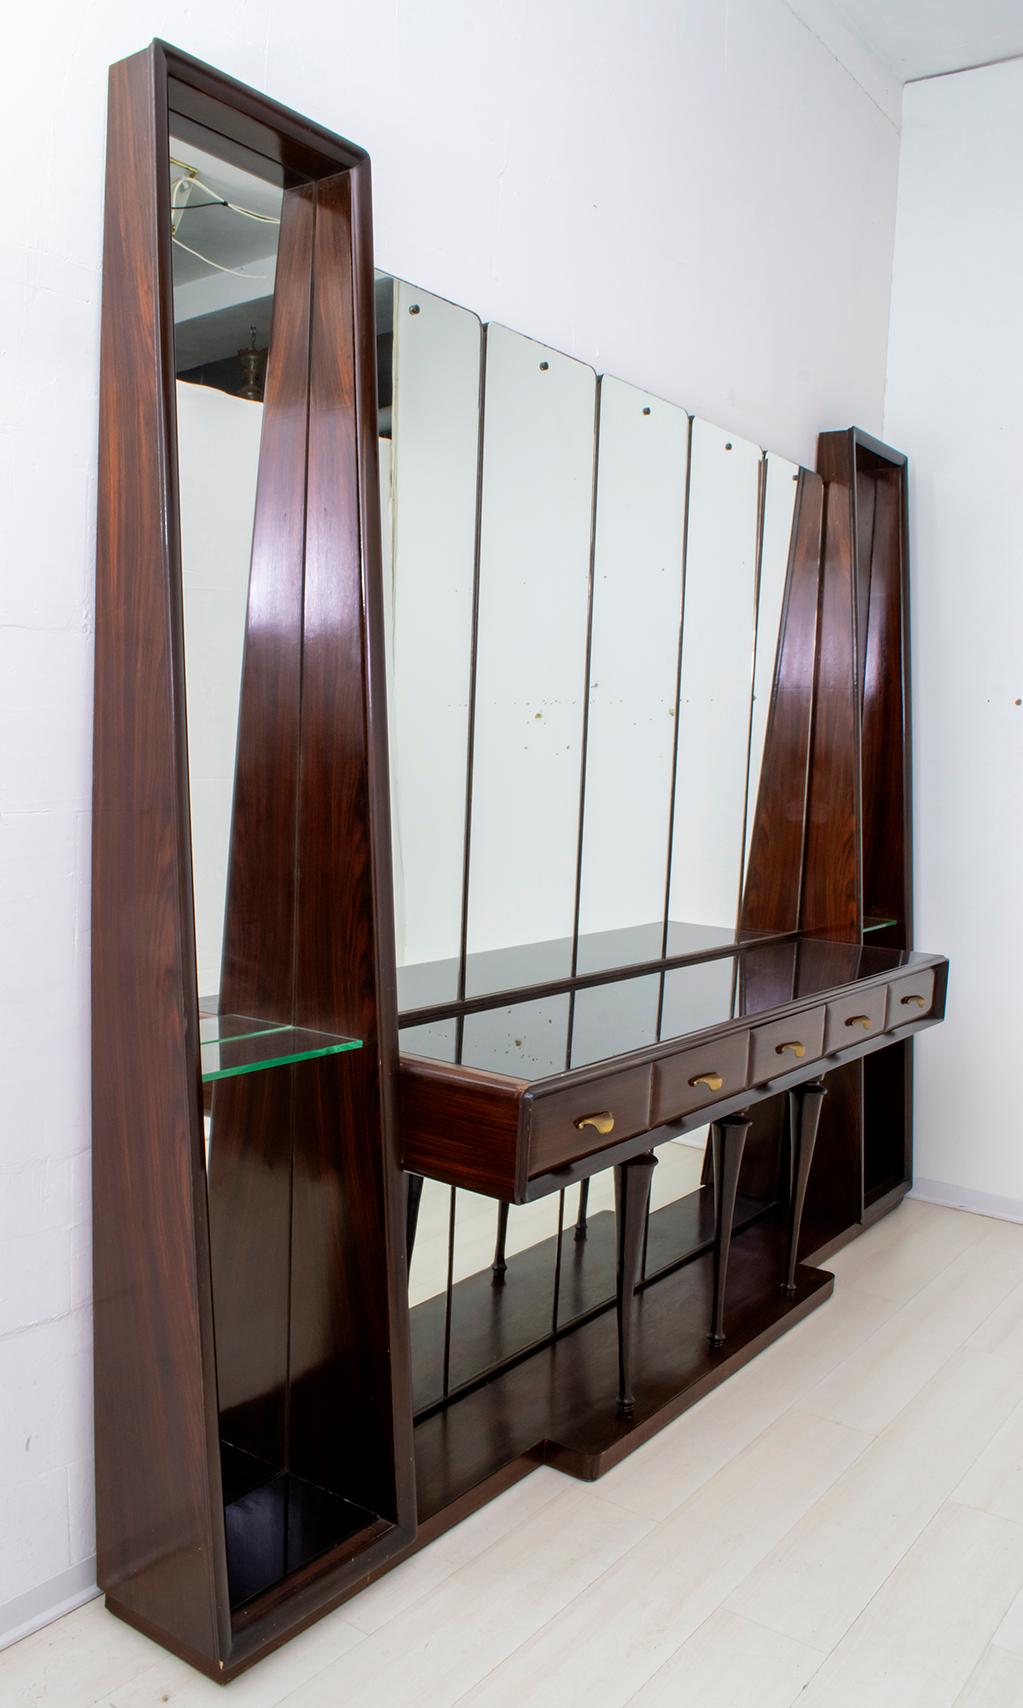 Large mirror designed by the well-known designer Guglielmo Ulrich and produced by Arredamenti Casa between the 1940s and 1950s. In excellent condition, original Ar.Ca label.

In 1930 Guglielmo Ulrich founded the company Ar.Ca (home furnishings),